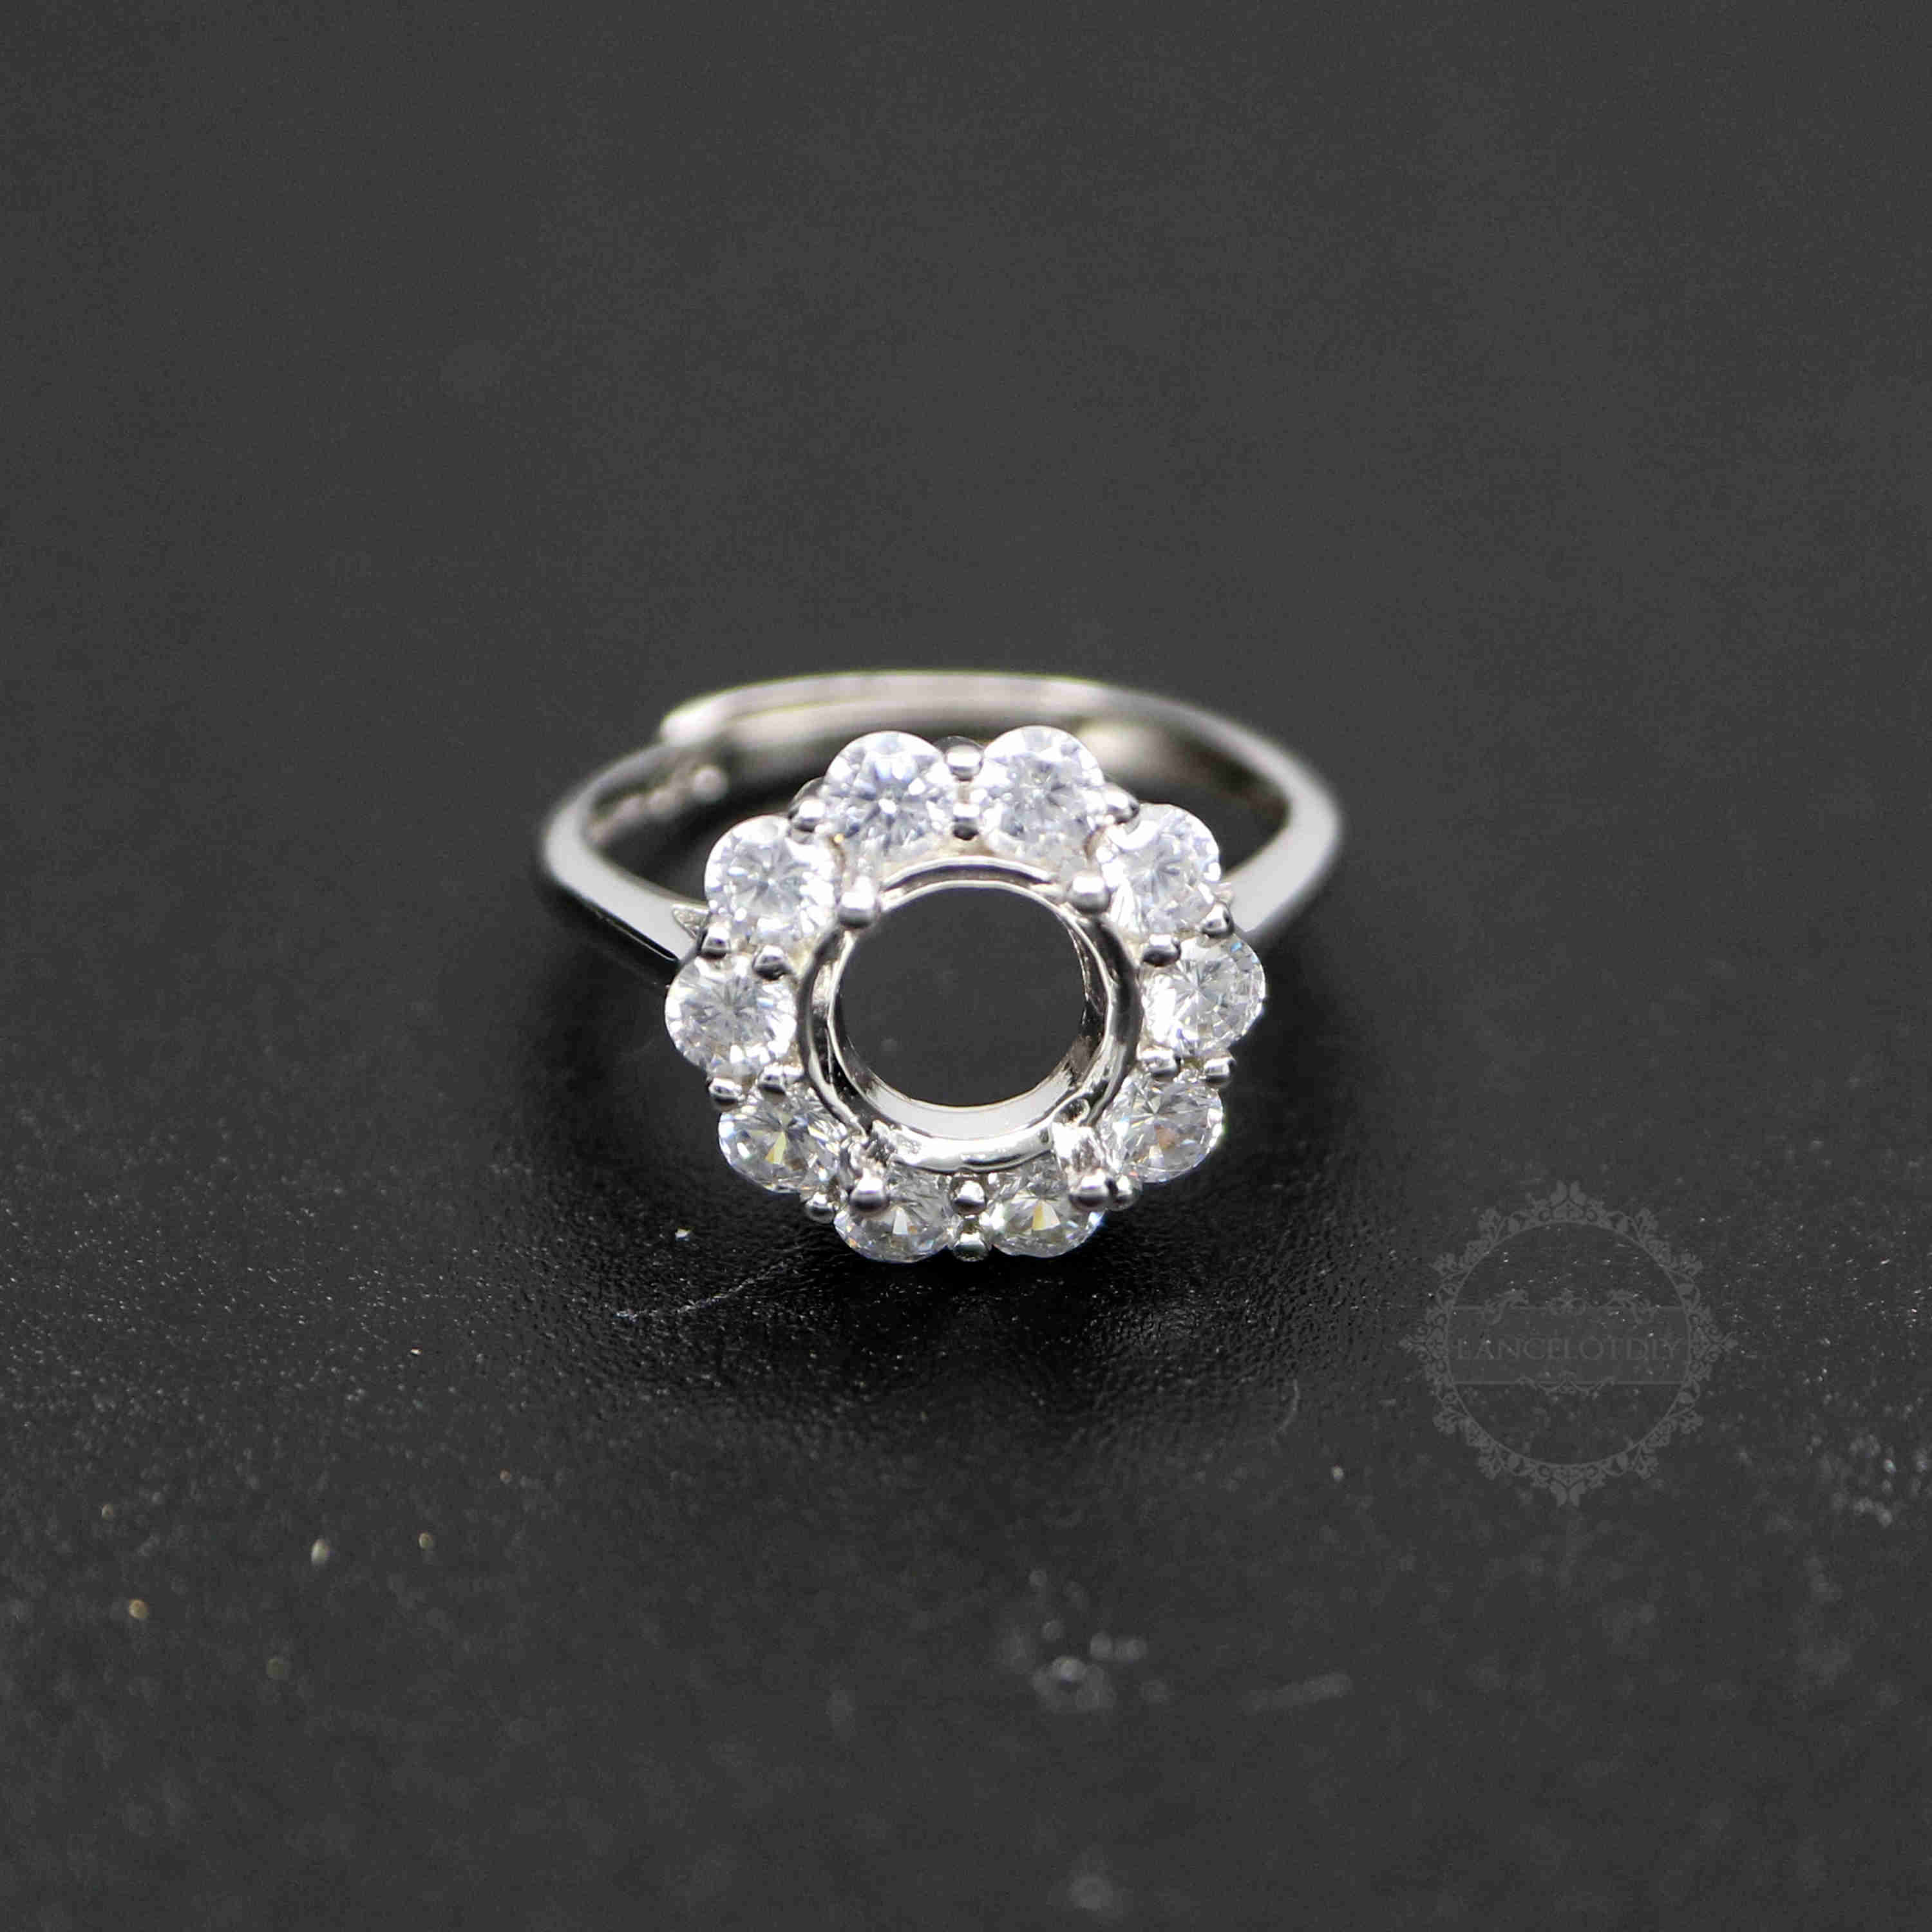 1Pcs 4-8MM Round Flower Silver Gems Cz Stone Prong Setting Solid 925 Sterling Silver Bezel Tray DIY Adjustable Ring Settings 1212046 - Click Image to Close